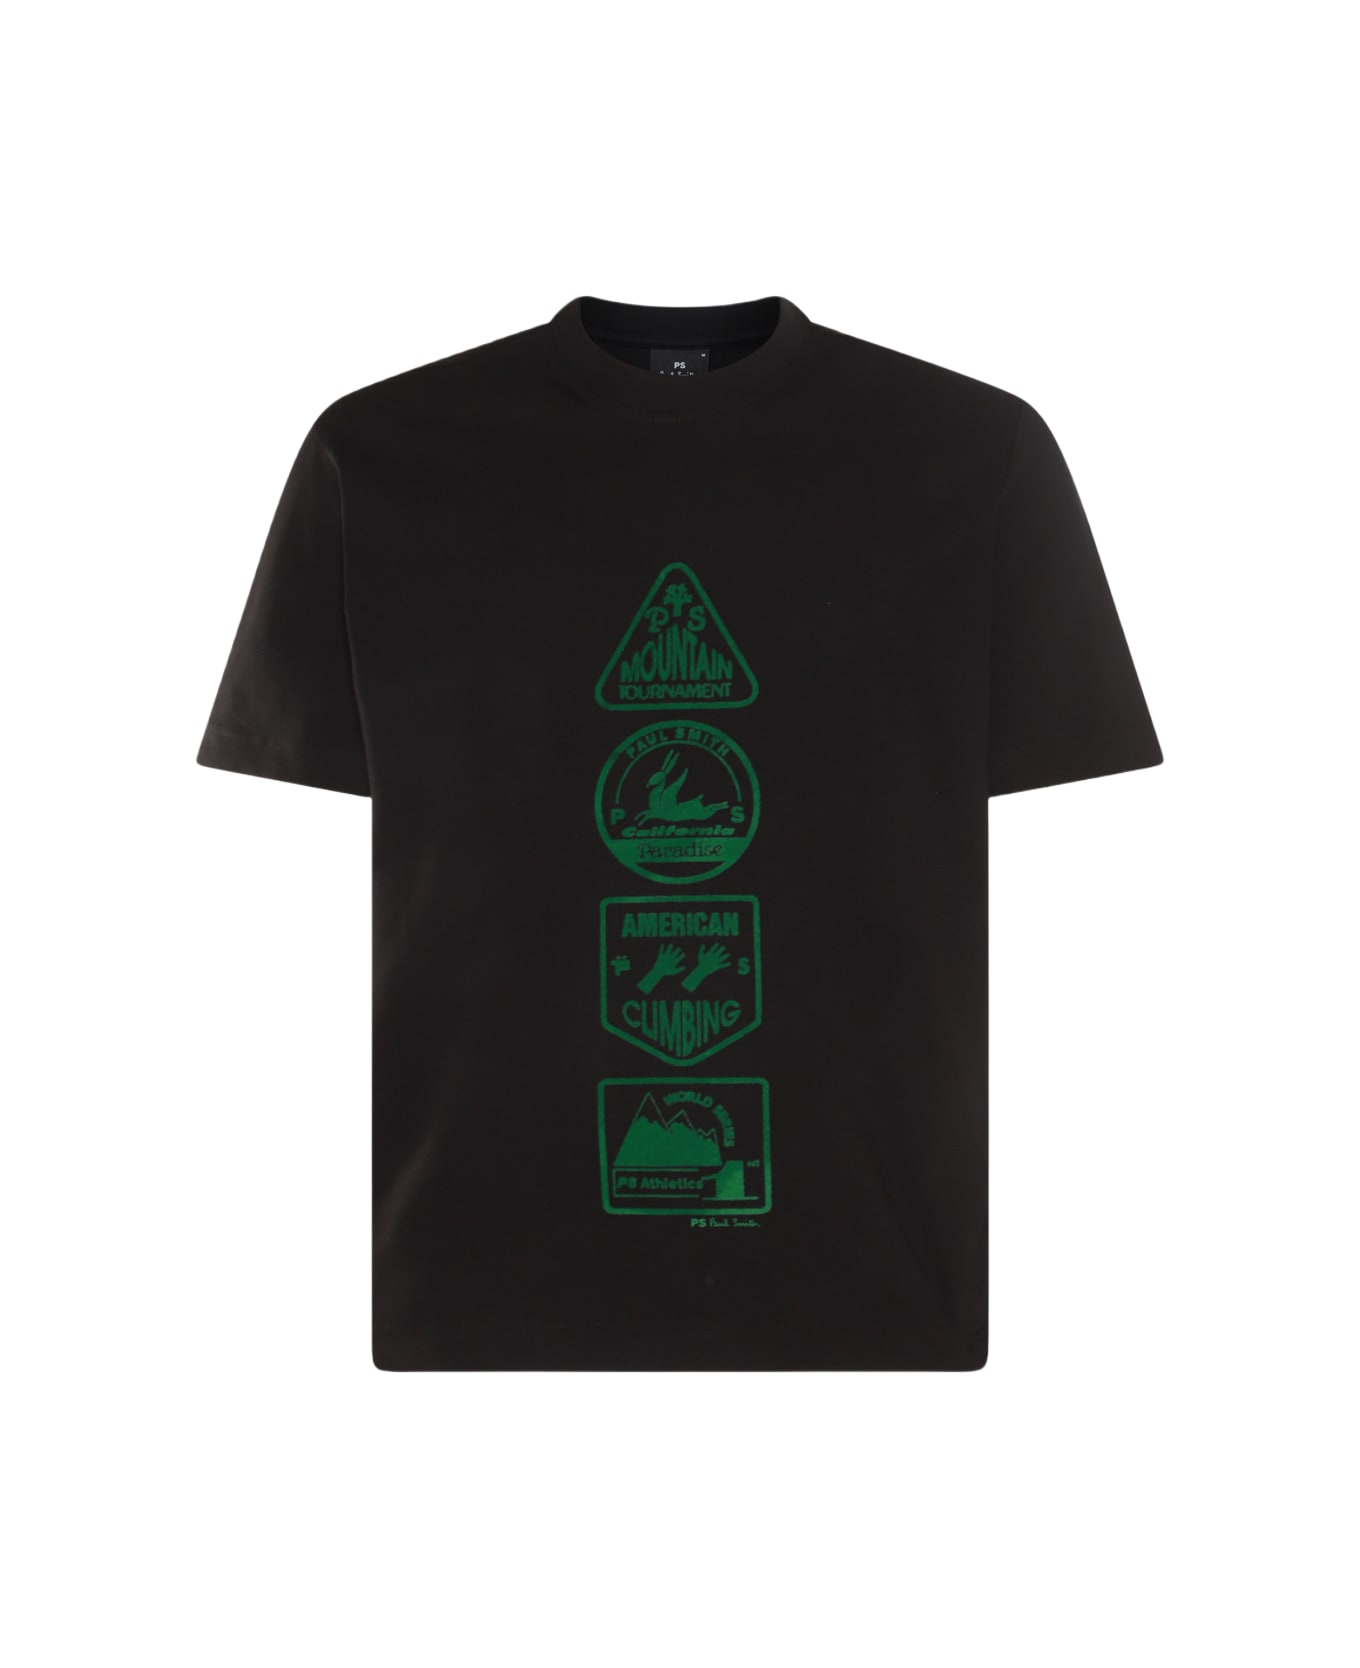 Paul Smith Black And Green Cotton T-shirt - Black